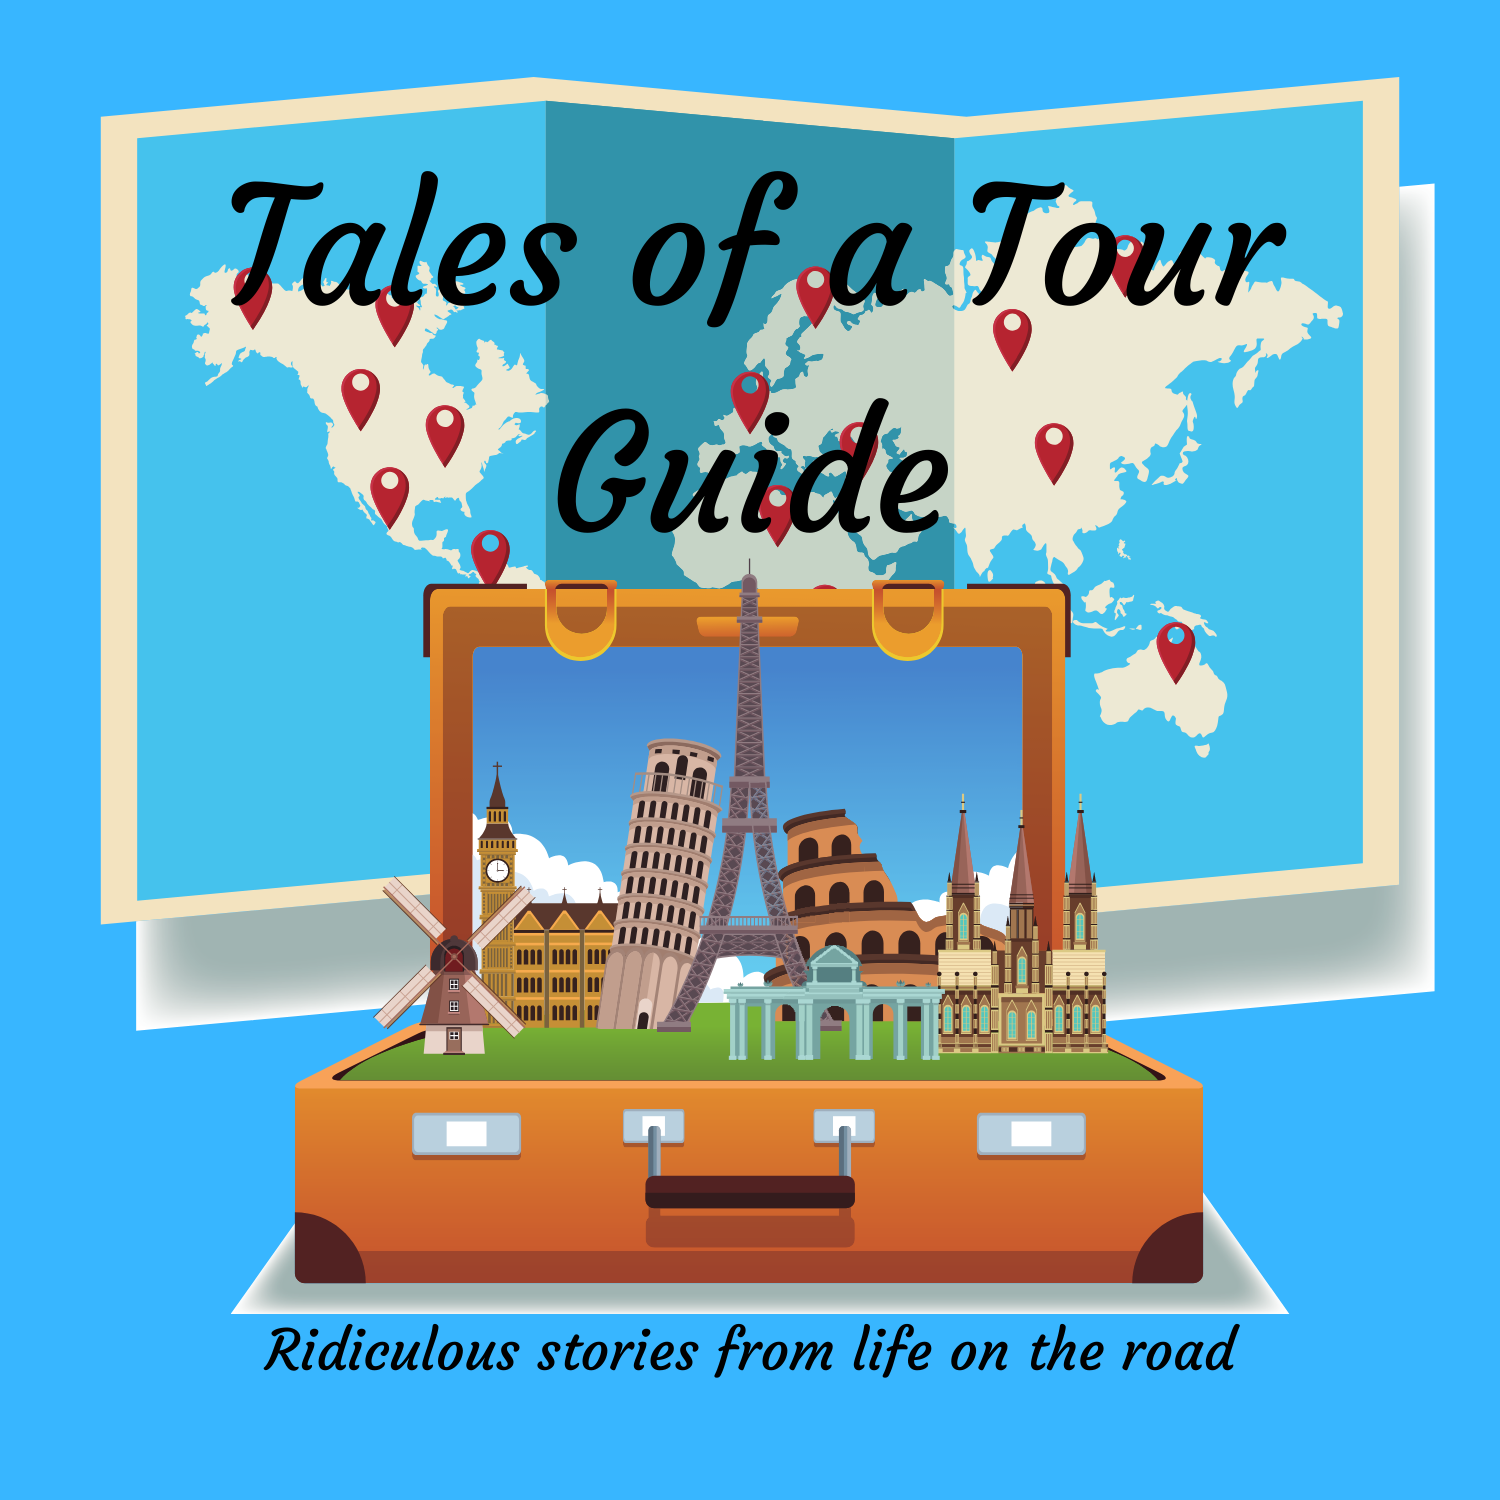 Tales of a Tour Guide